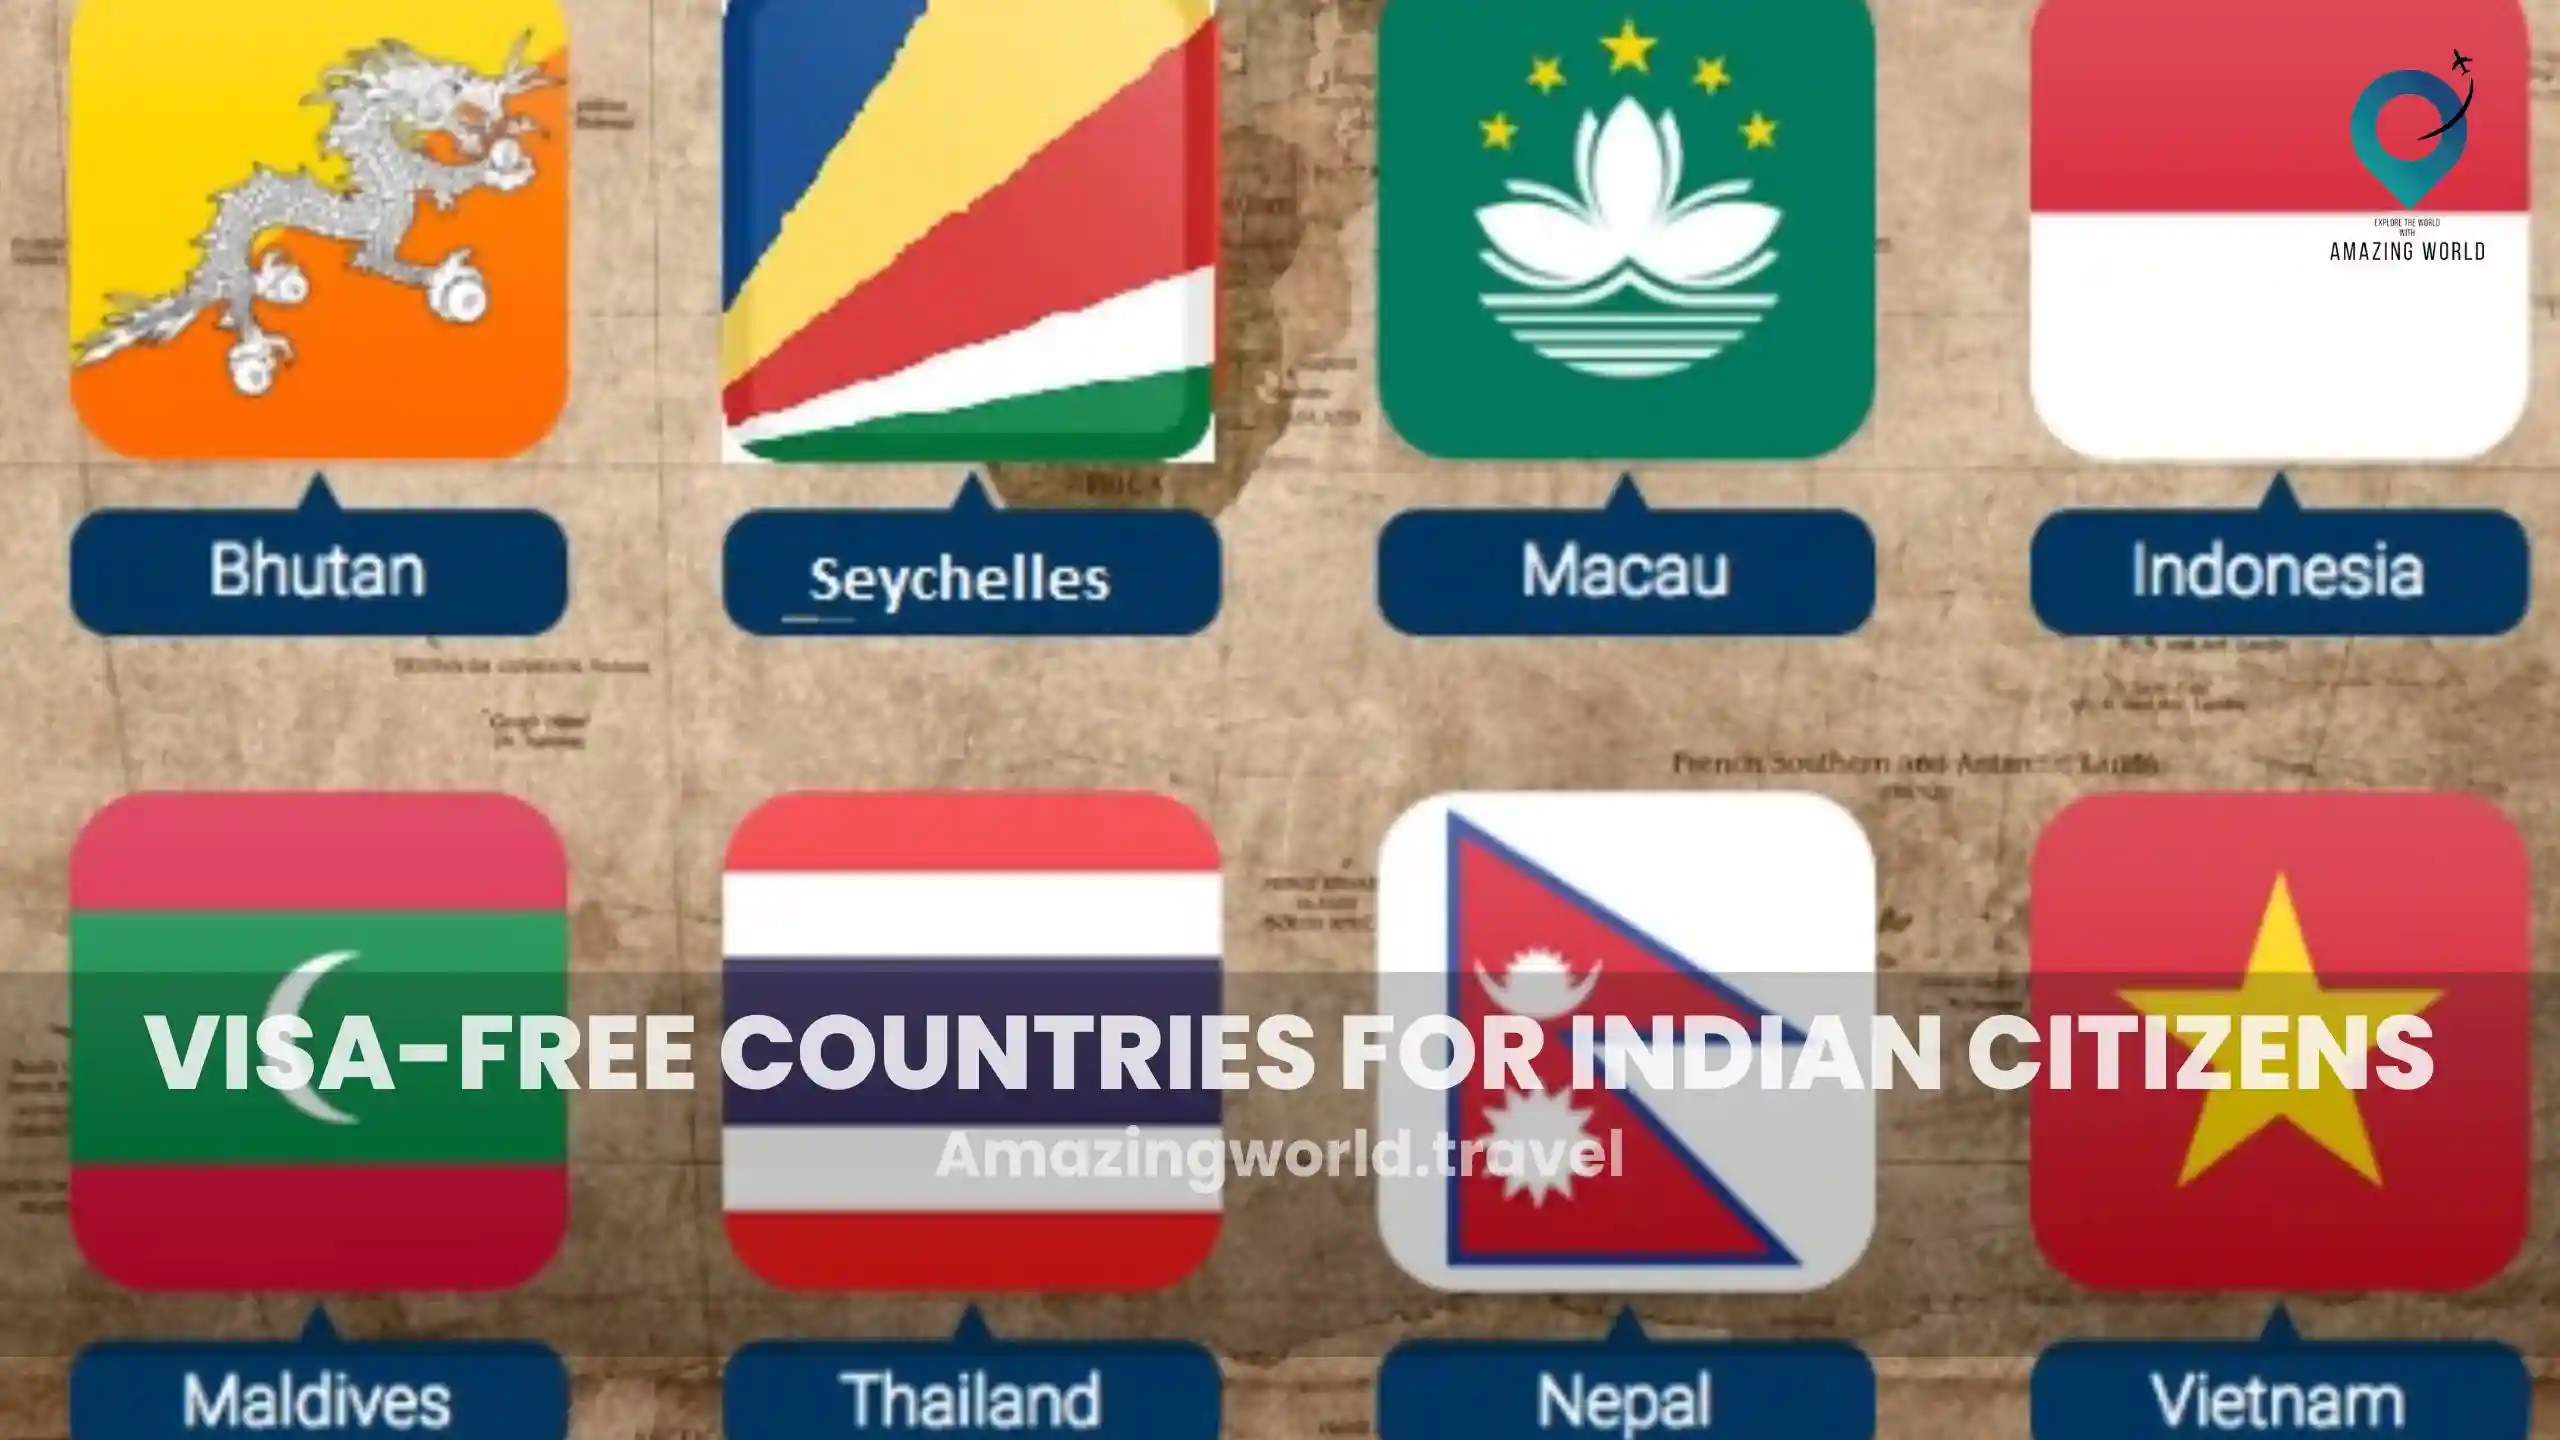  Visa-free-countries-for-Indian-citizens